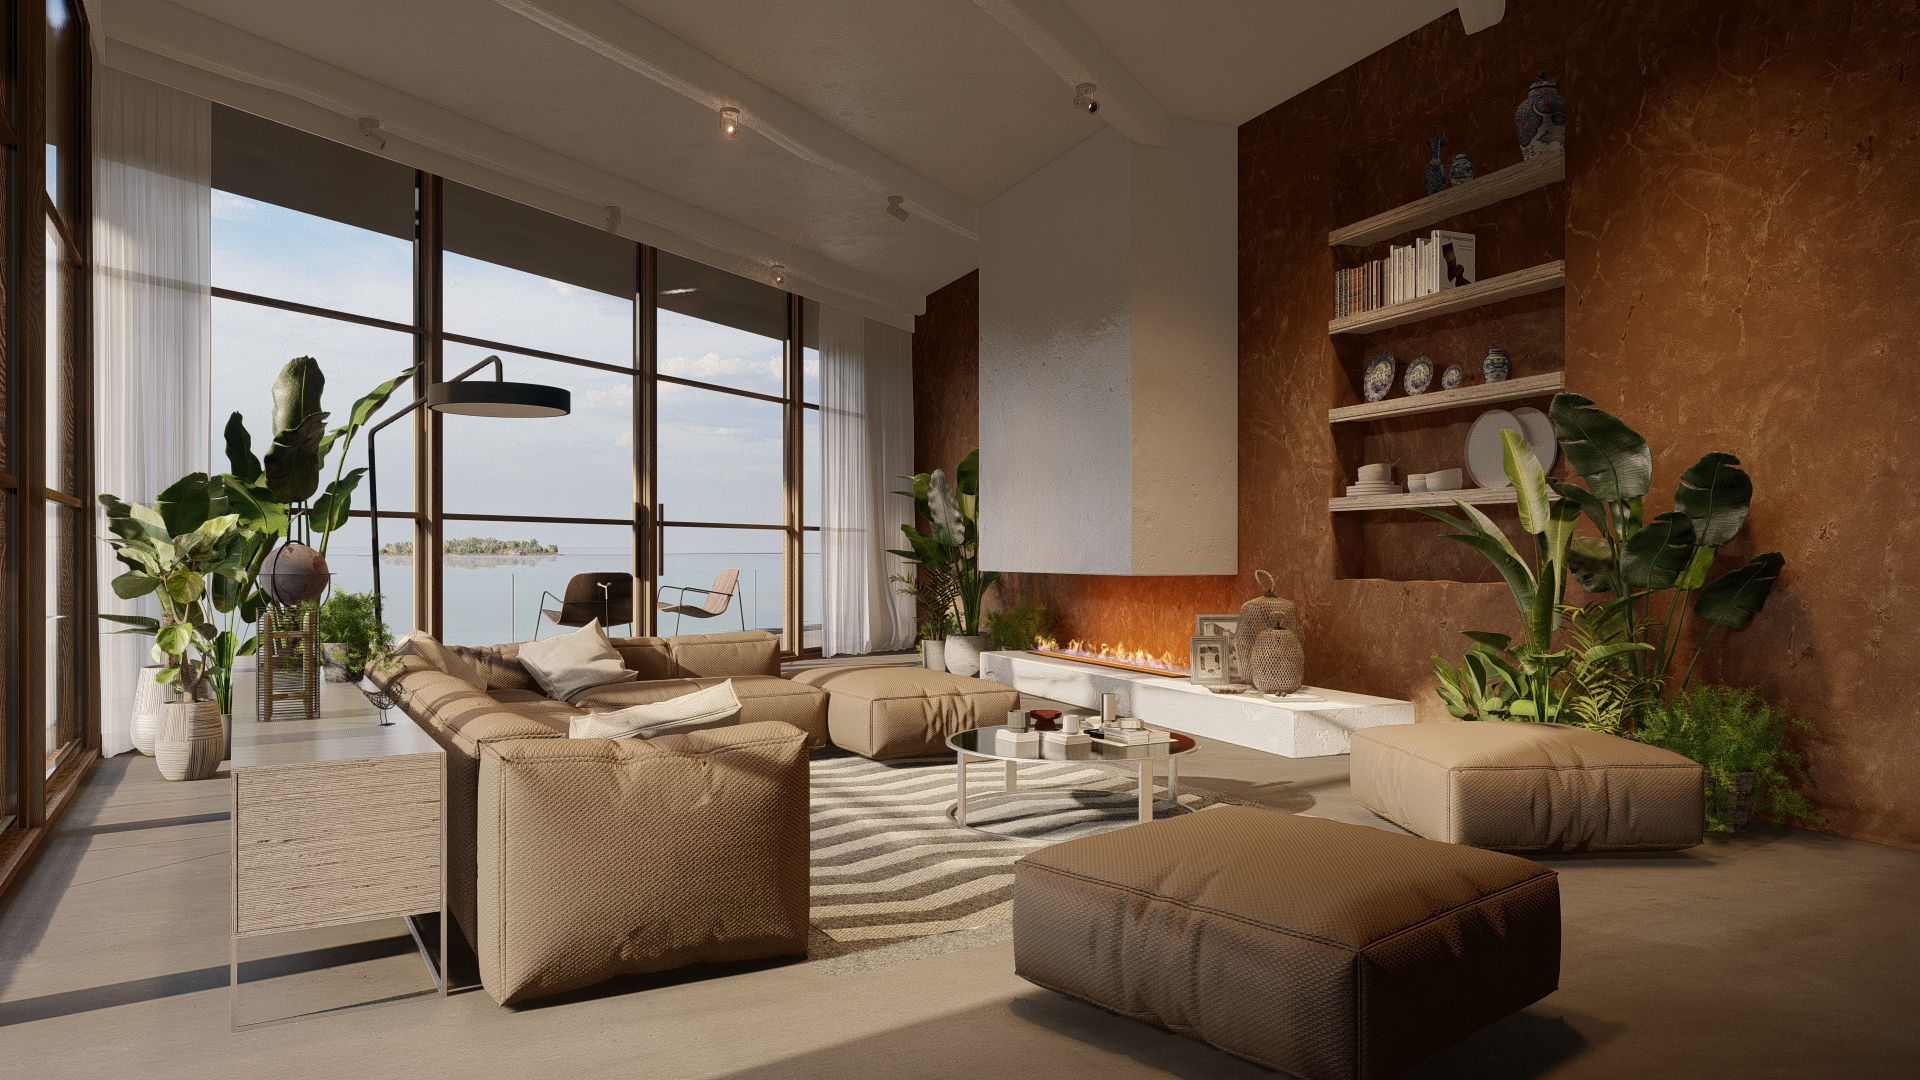 images/site/producten/Lumion/showcasegallery/interior-rendering-living-room-with-modern-furniture.jpg.jpg#joomlaImage://local-images/site/producten/Lumion/showcasegallery/interior-rendering-living-room-with-modern-furniture.jpg.jpg?width=1920&height=1080